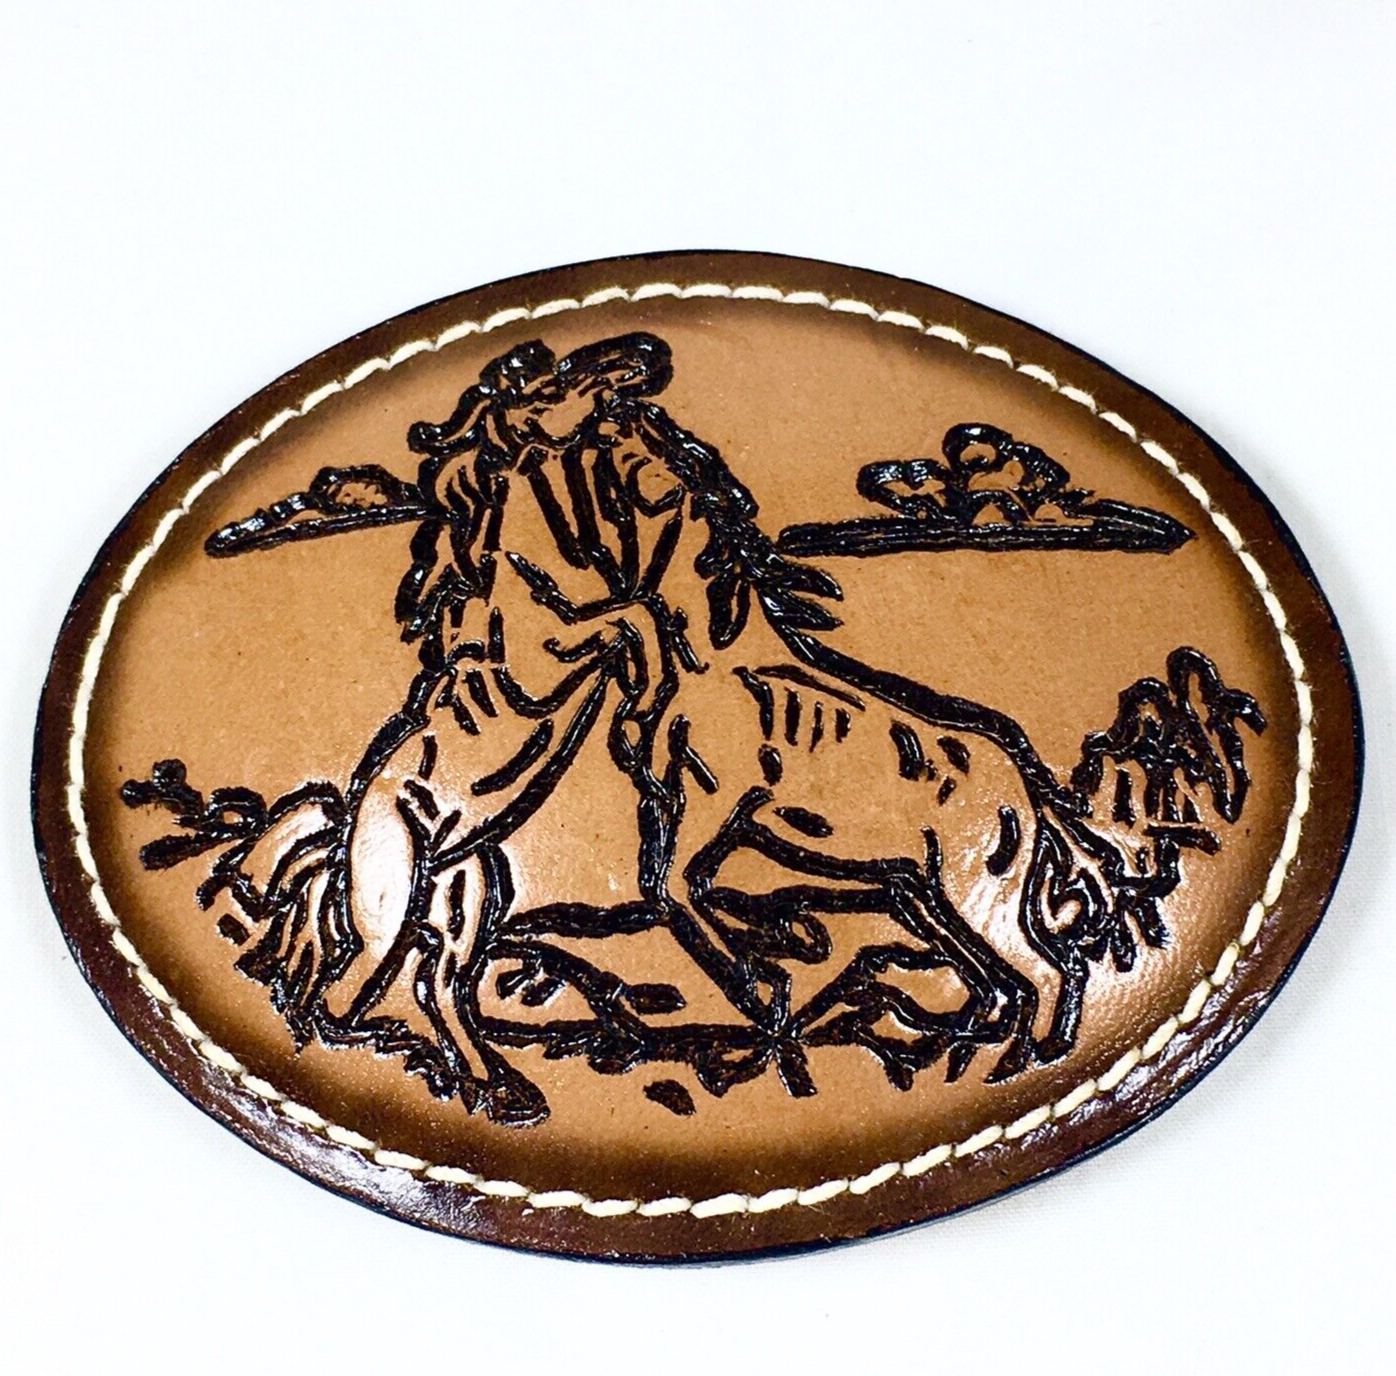 Primary image for Vintage Belt Buckle Western Horses Cowboy Cowgirl Tooled Leather Stitch